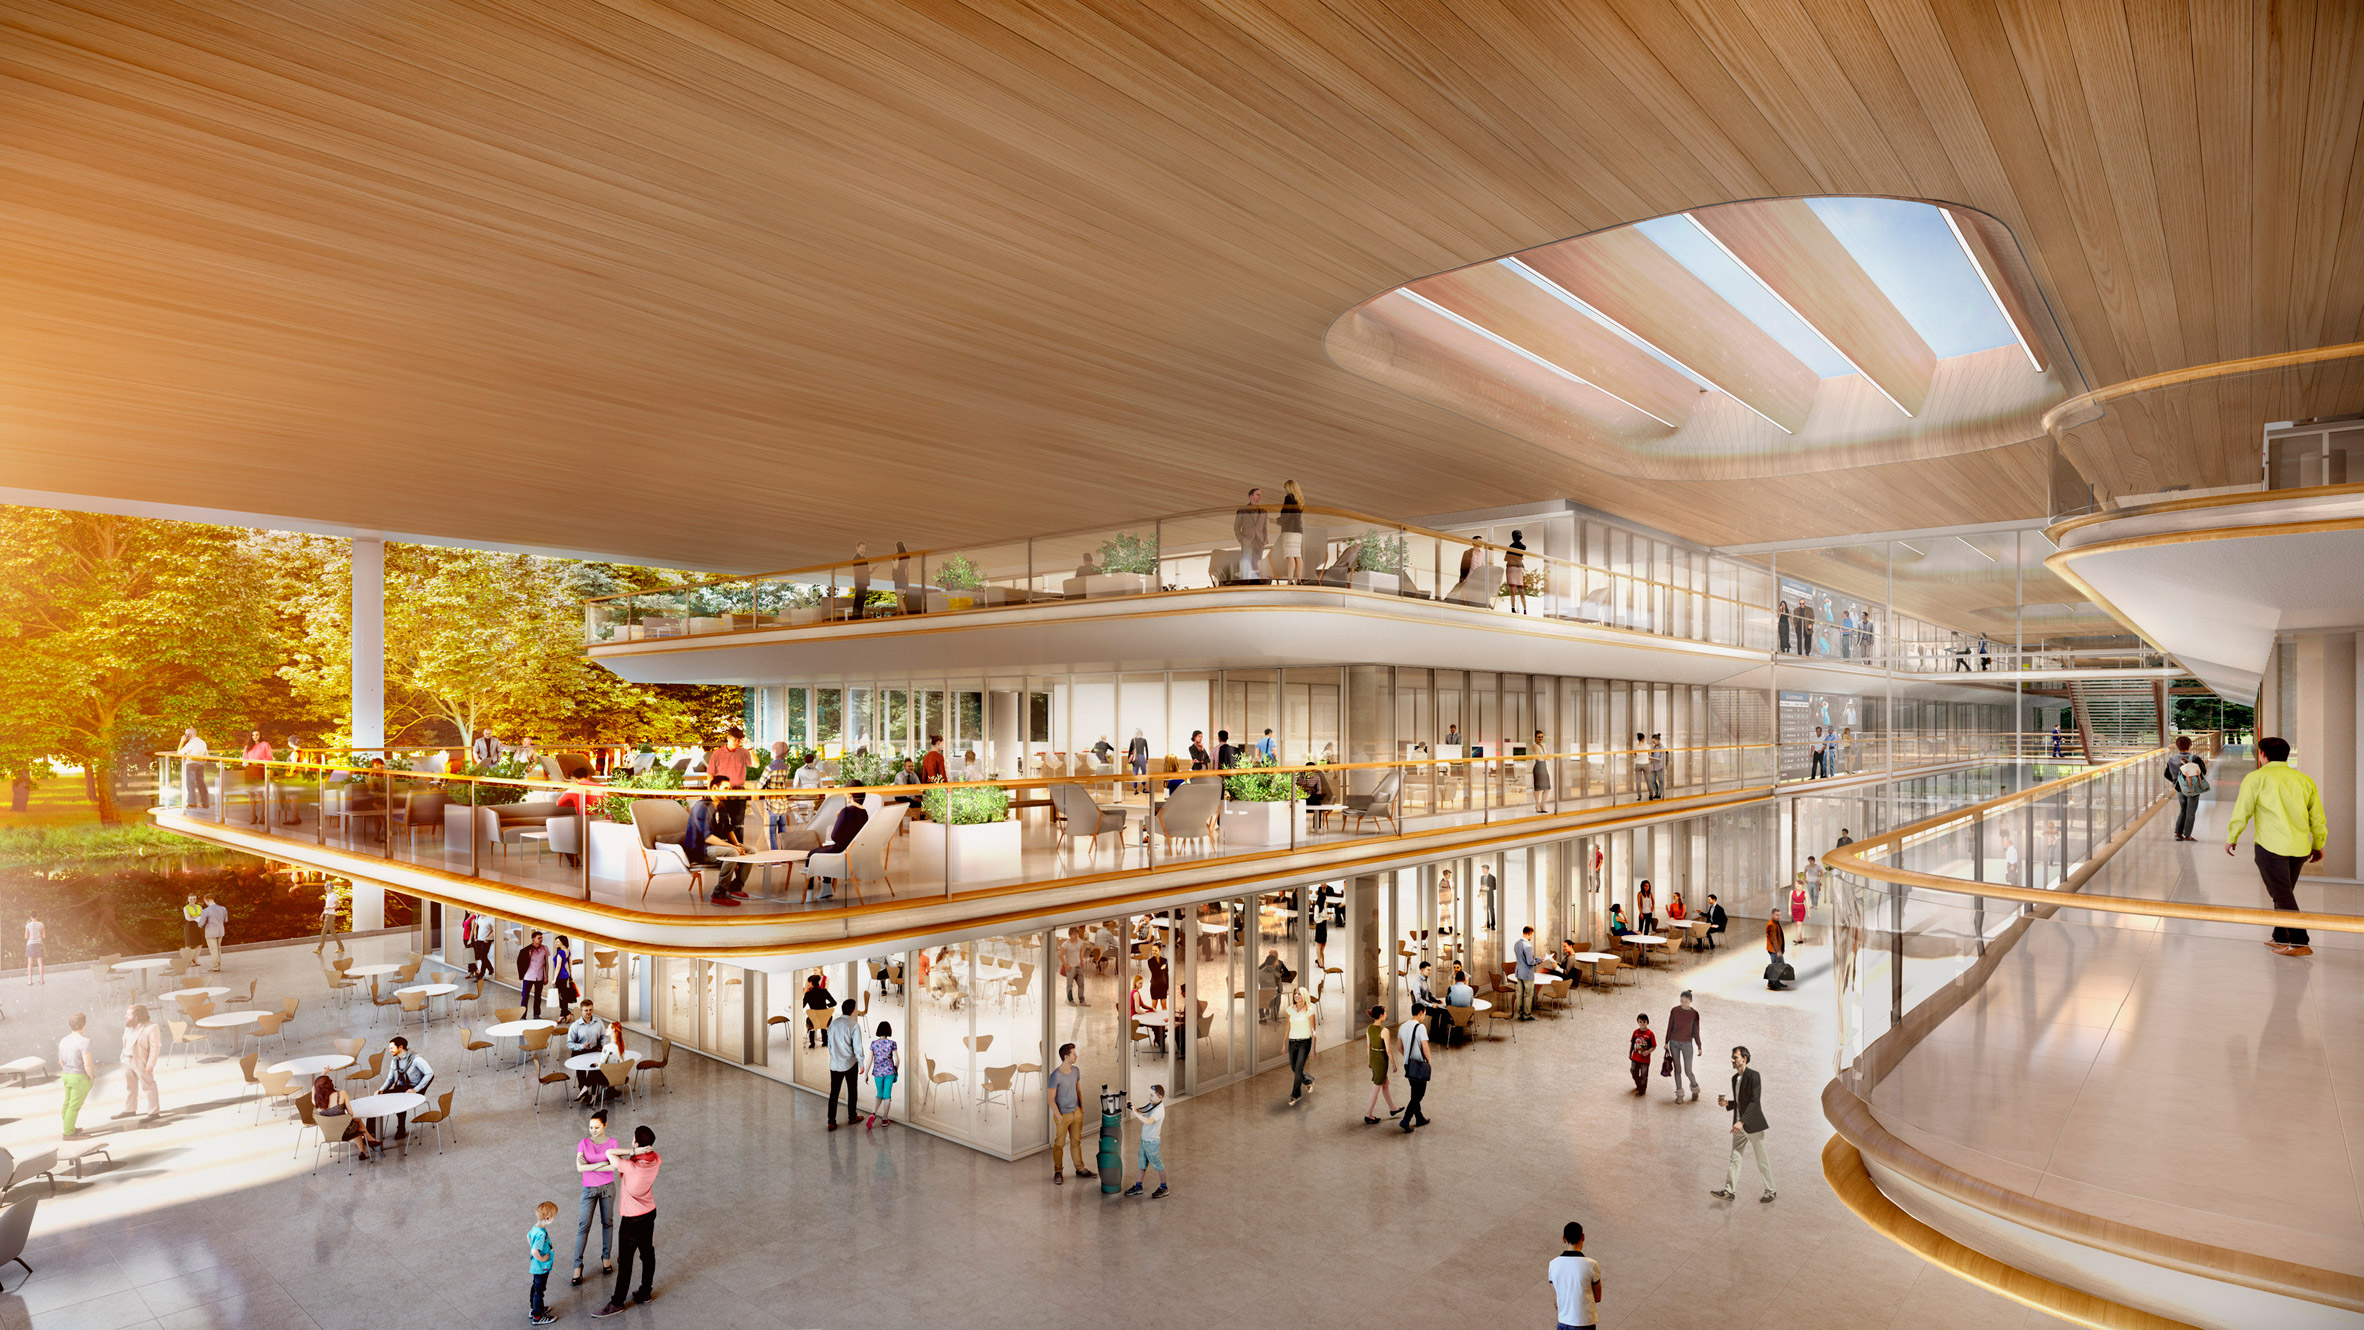 PGA by Foster Partners